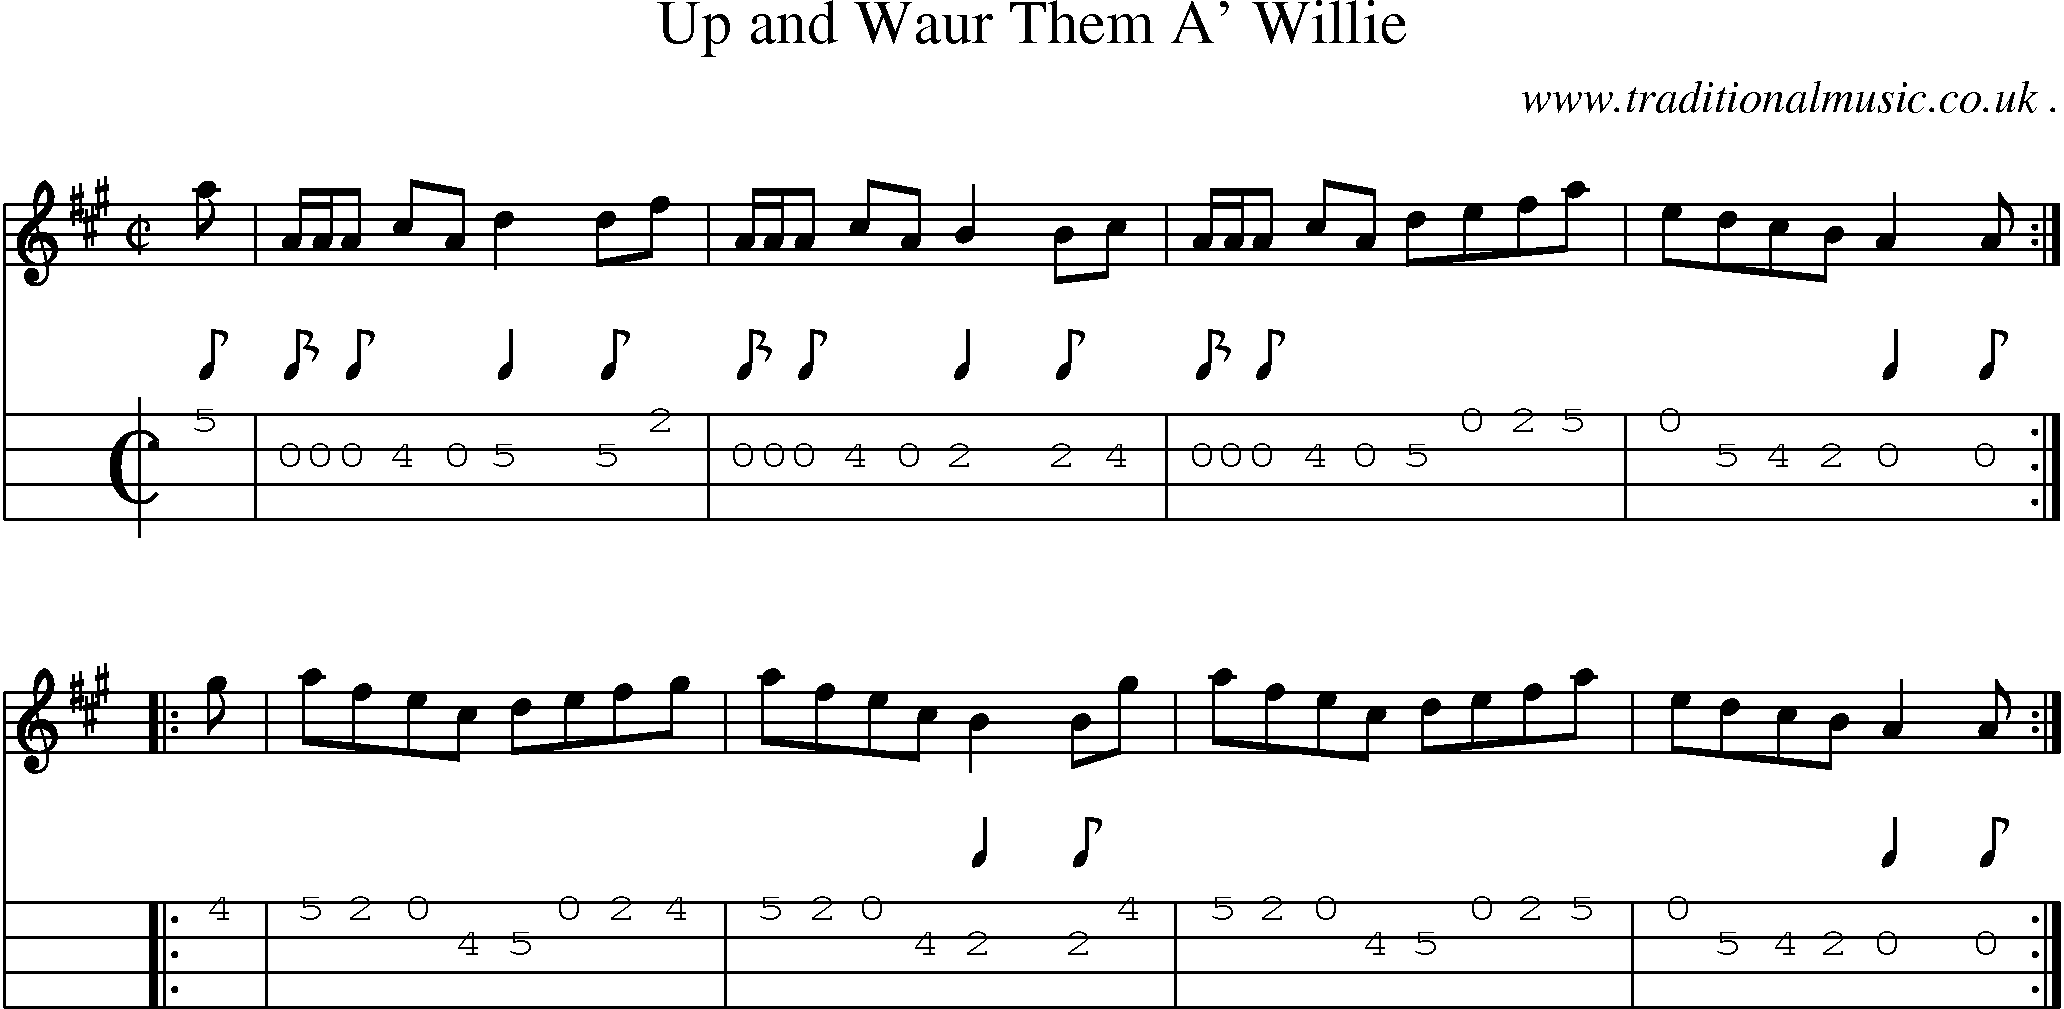 Sheet-music  score, Chords and Mandolin Tabs for Up And Waur Them A Willie